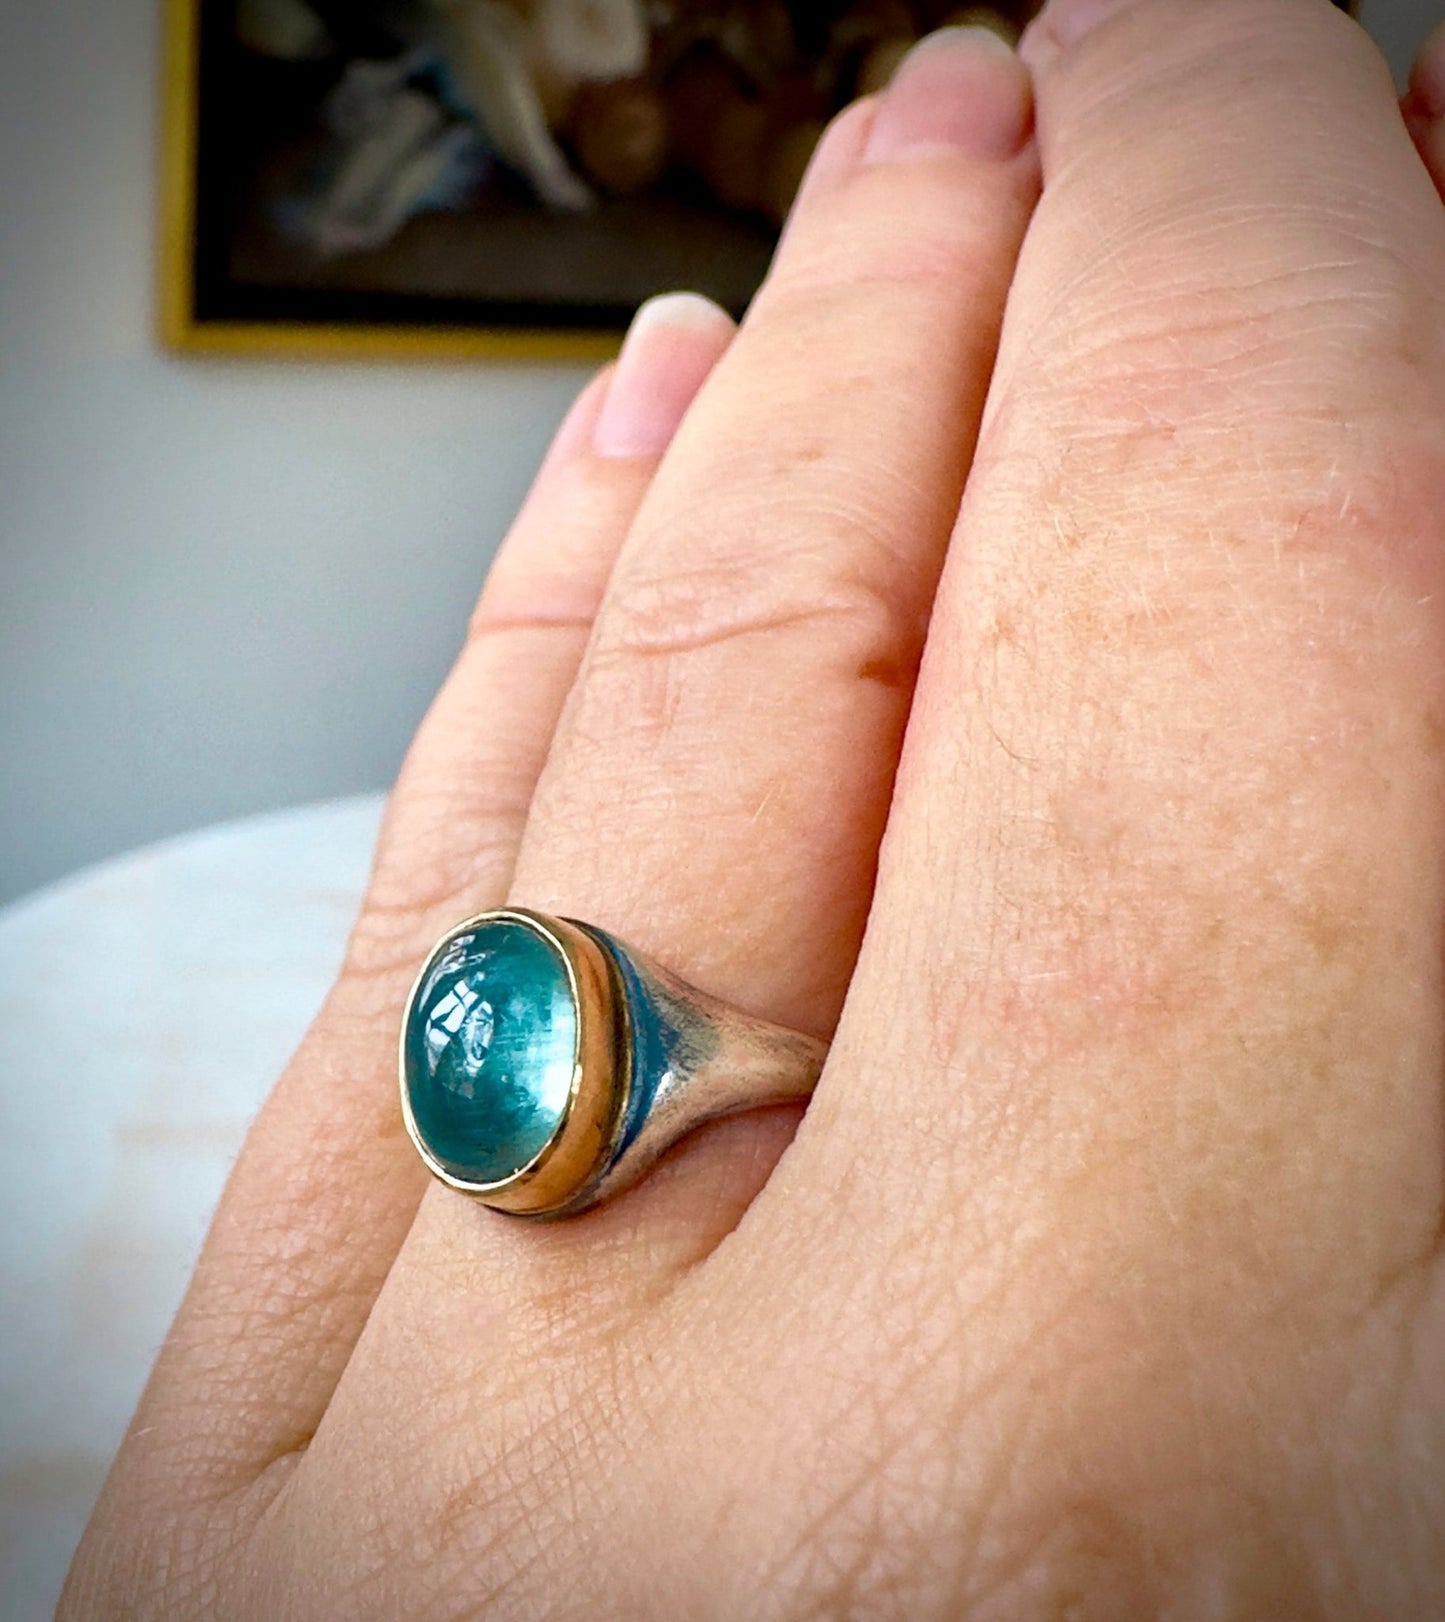 Aqua Kyanite Signet Ring With 18k Setting - Bluecave Jewelry